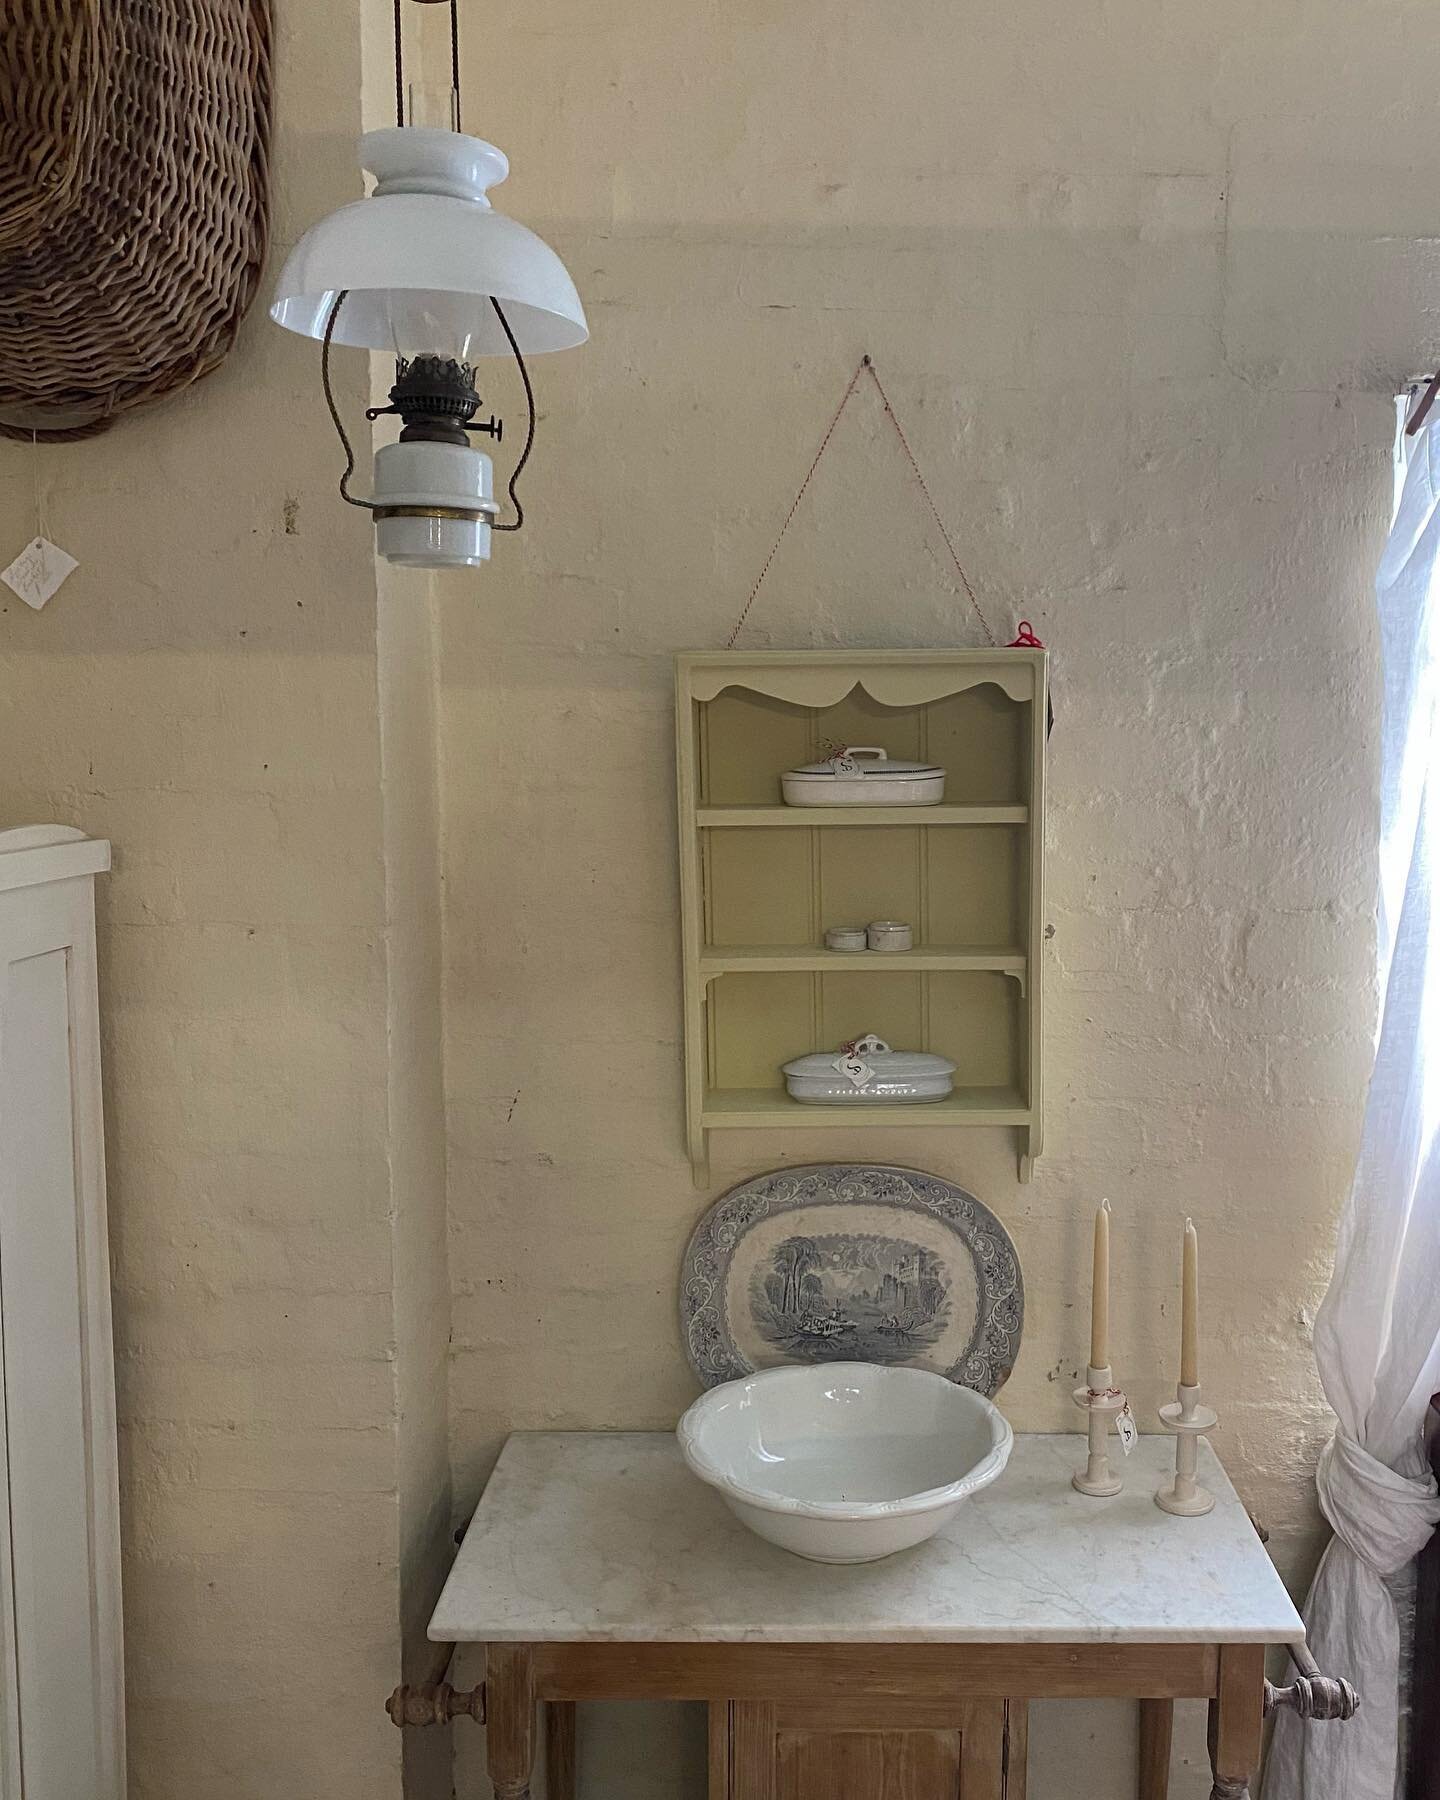 In the Still Room
@empire.revival 
This lovely vintage milk glass oil lantern is looking gorgeous; just arrived in store and will be on my website this evening at 6, if not sold prior.  Also adding the beautiful antique Meakin bowl, two antique lidde